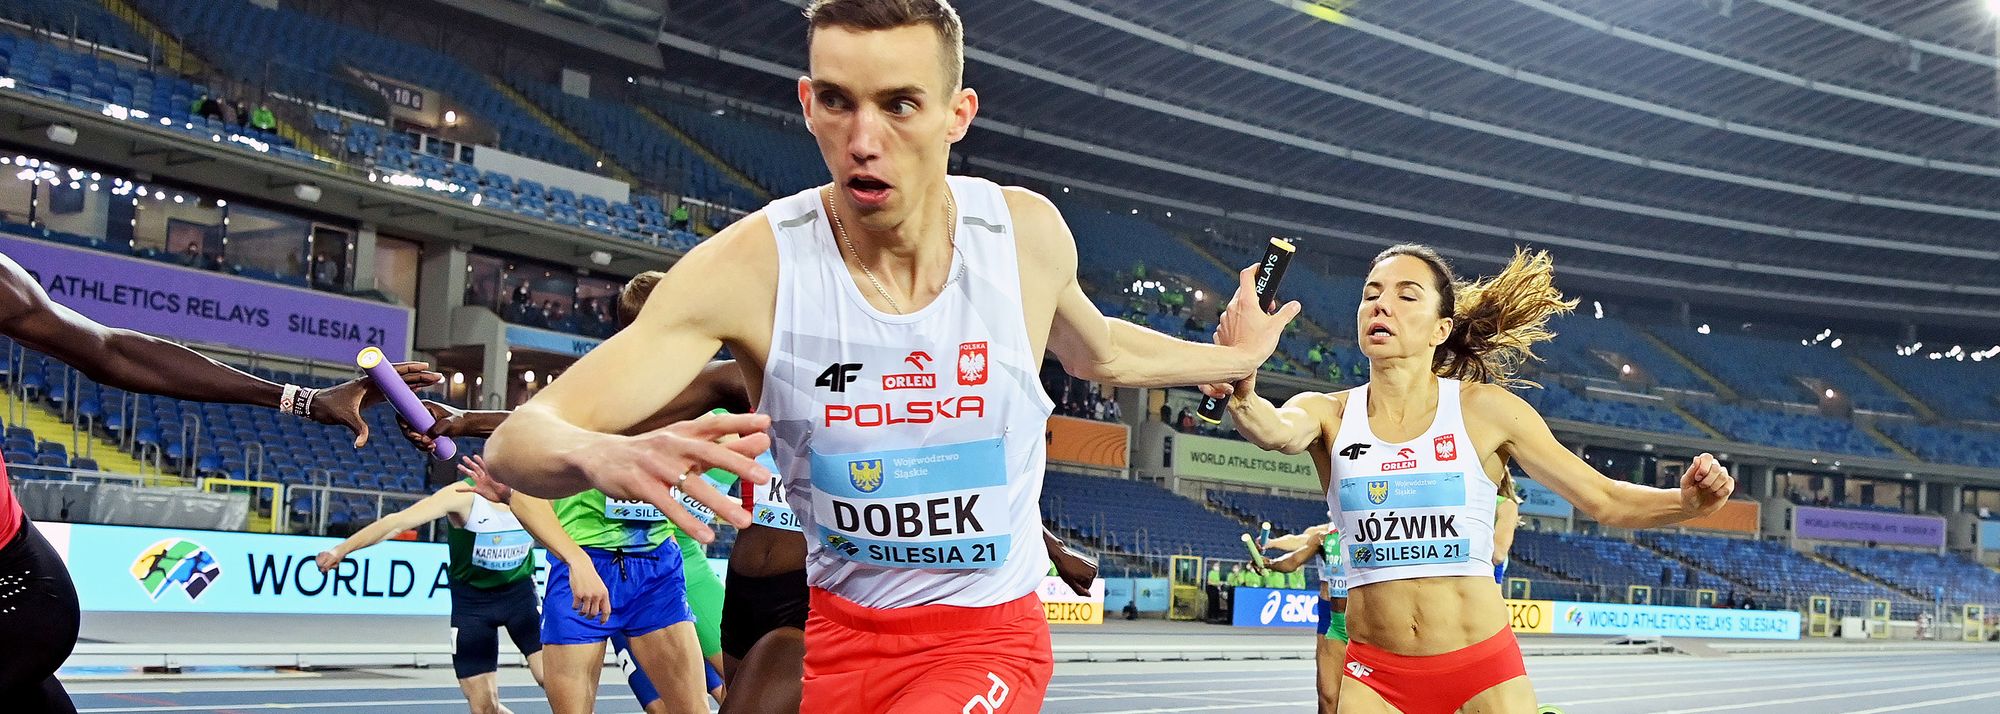 There was success for the host nation Poland on an action-packed first evening of competition at the World Athletics Relays Silesia 21.